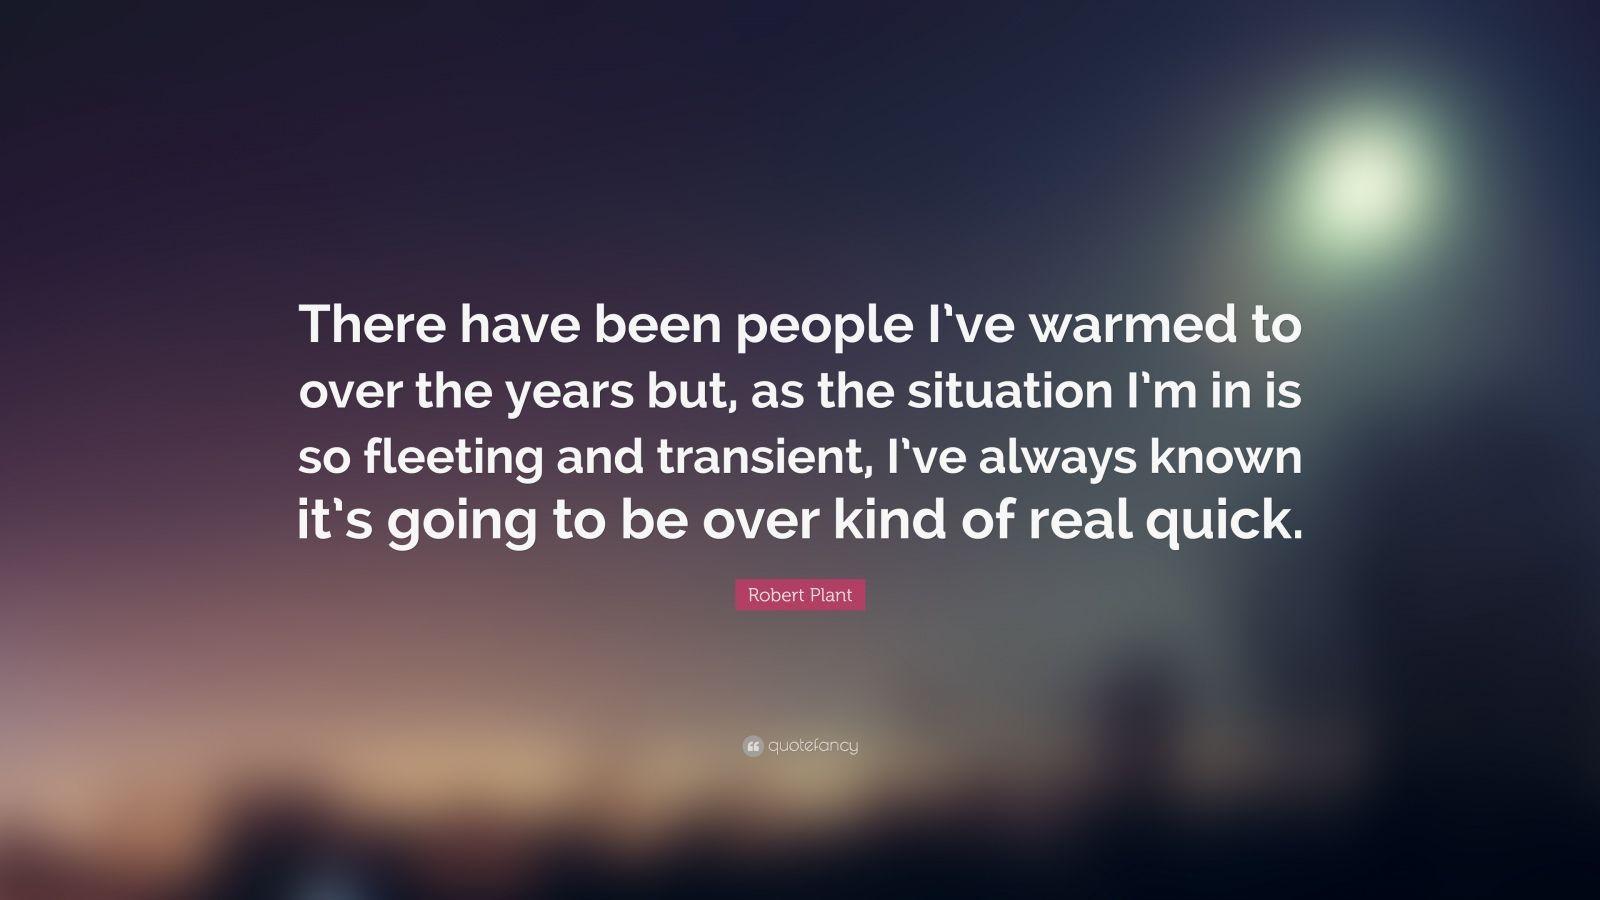 Robert Plant Quote: “There have been people I've warmed to over